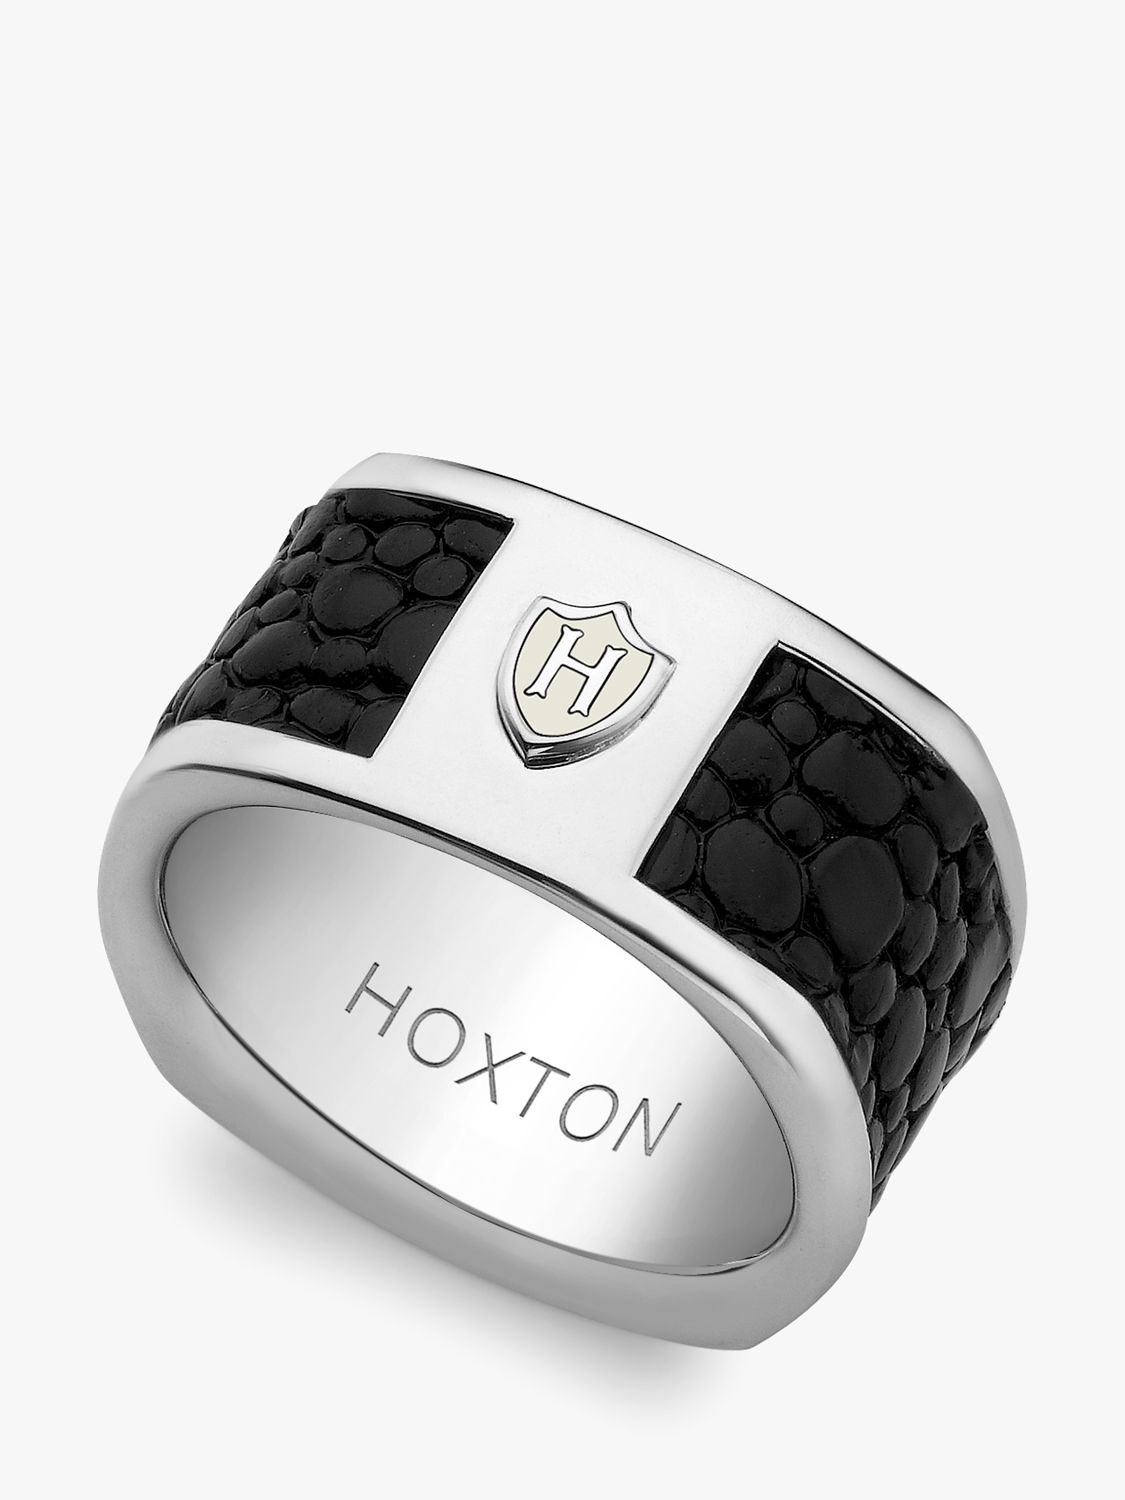 Hoxton London Men's Sterling Silver Black Printed Leather Inlay Ring, Silver/Black